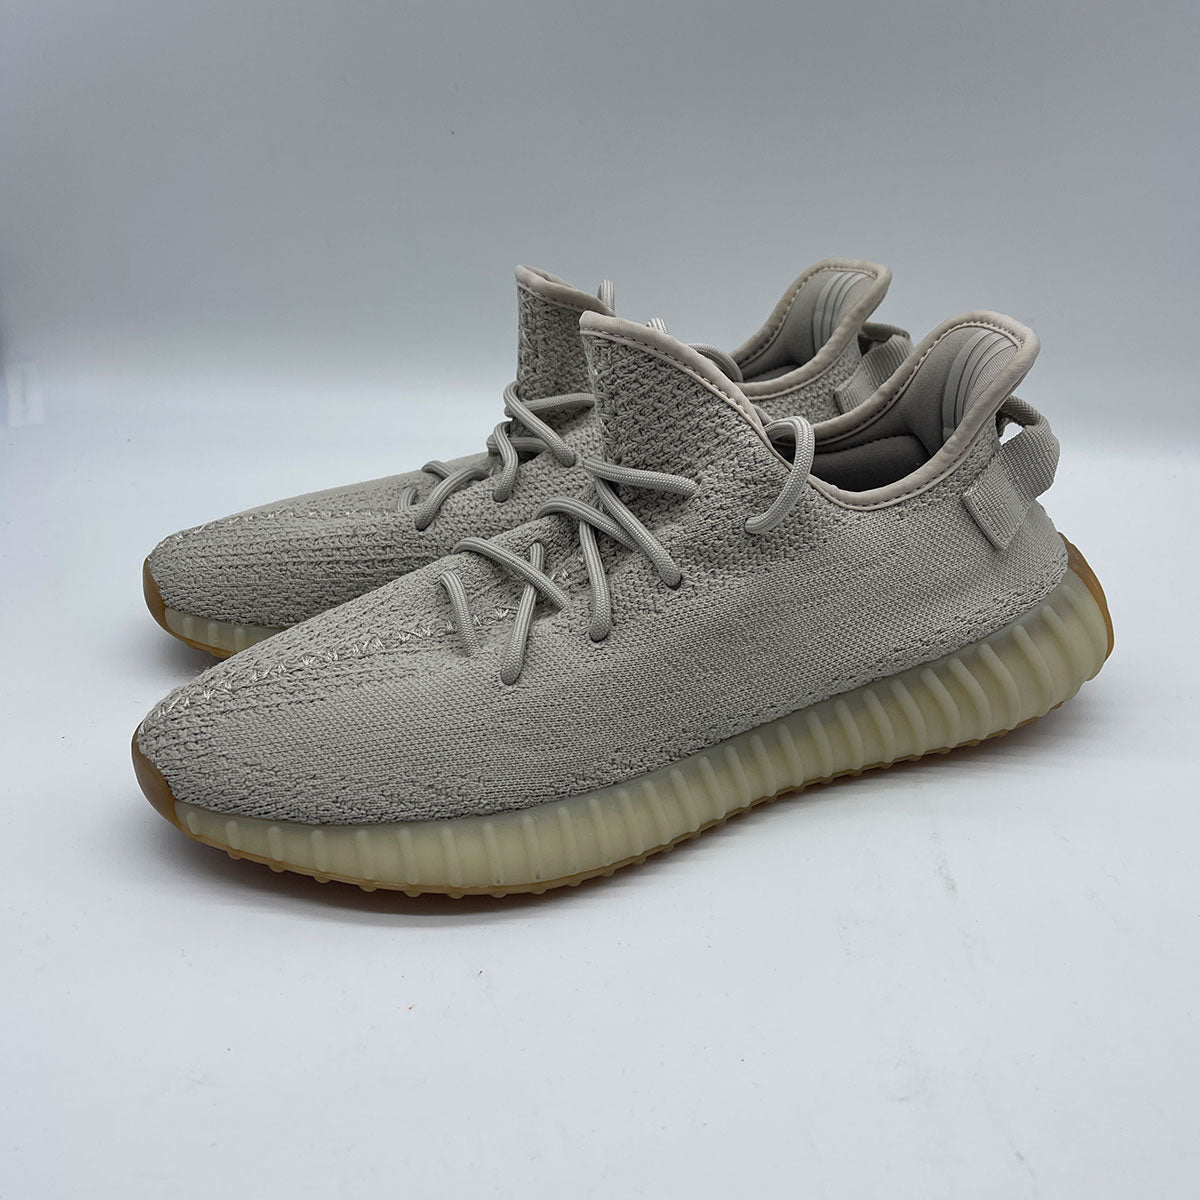 Adidas Yeezy Boost 350 V2 'Sesame' size 12 (Pre-Owned)